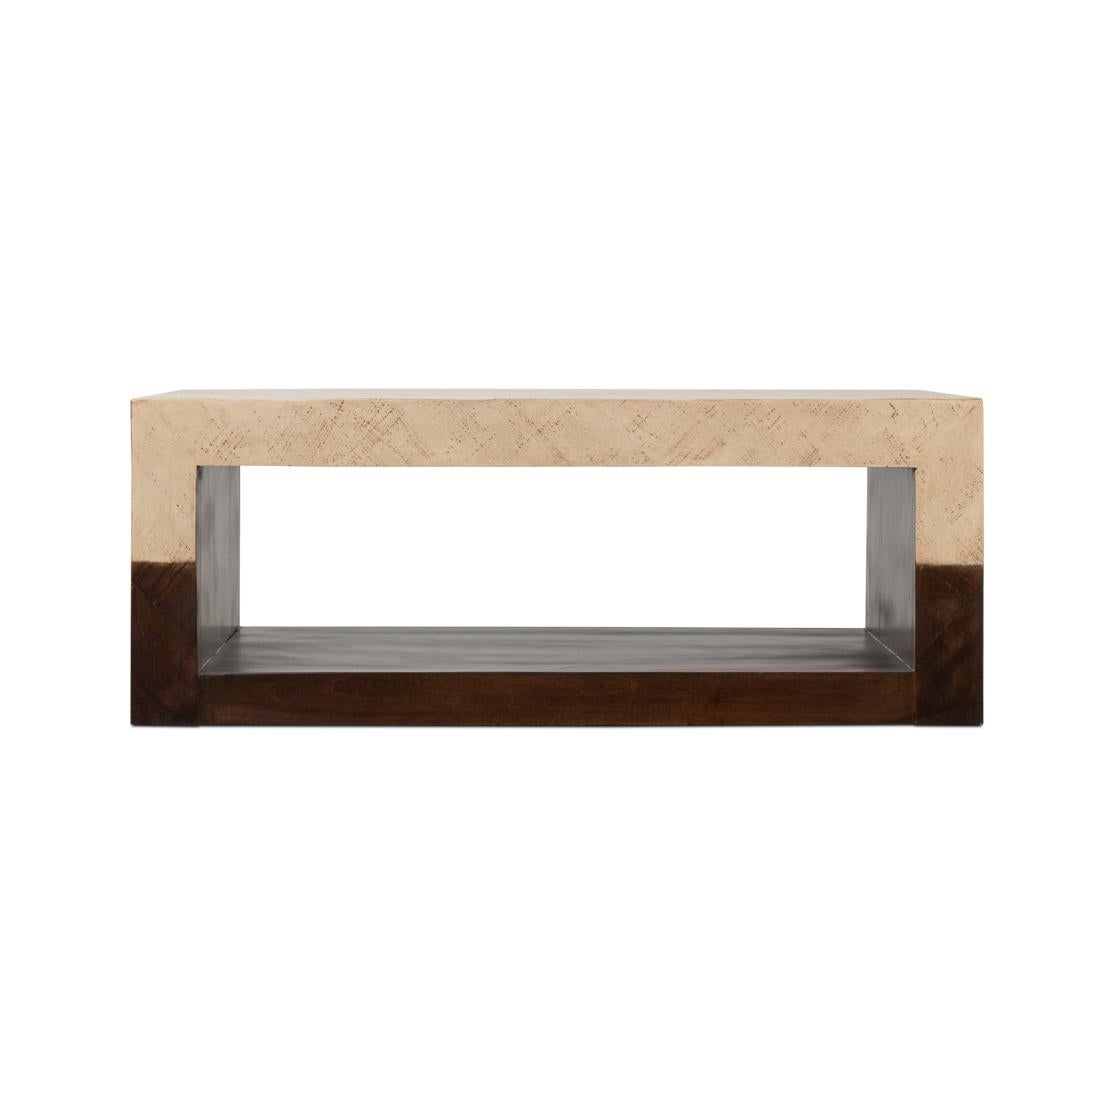 Wood Two-Tone Geometric Coffee Table For Sale